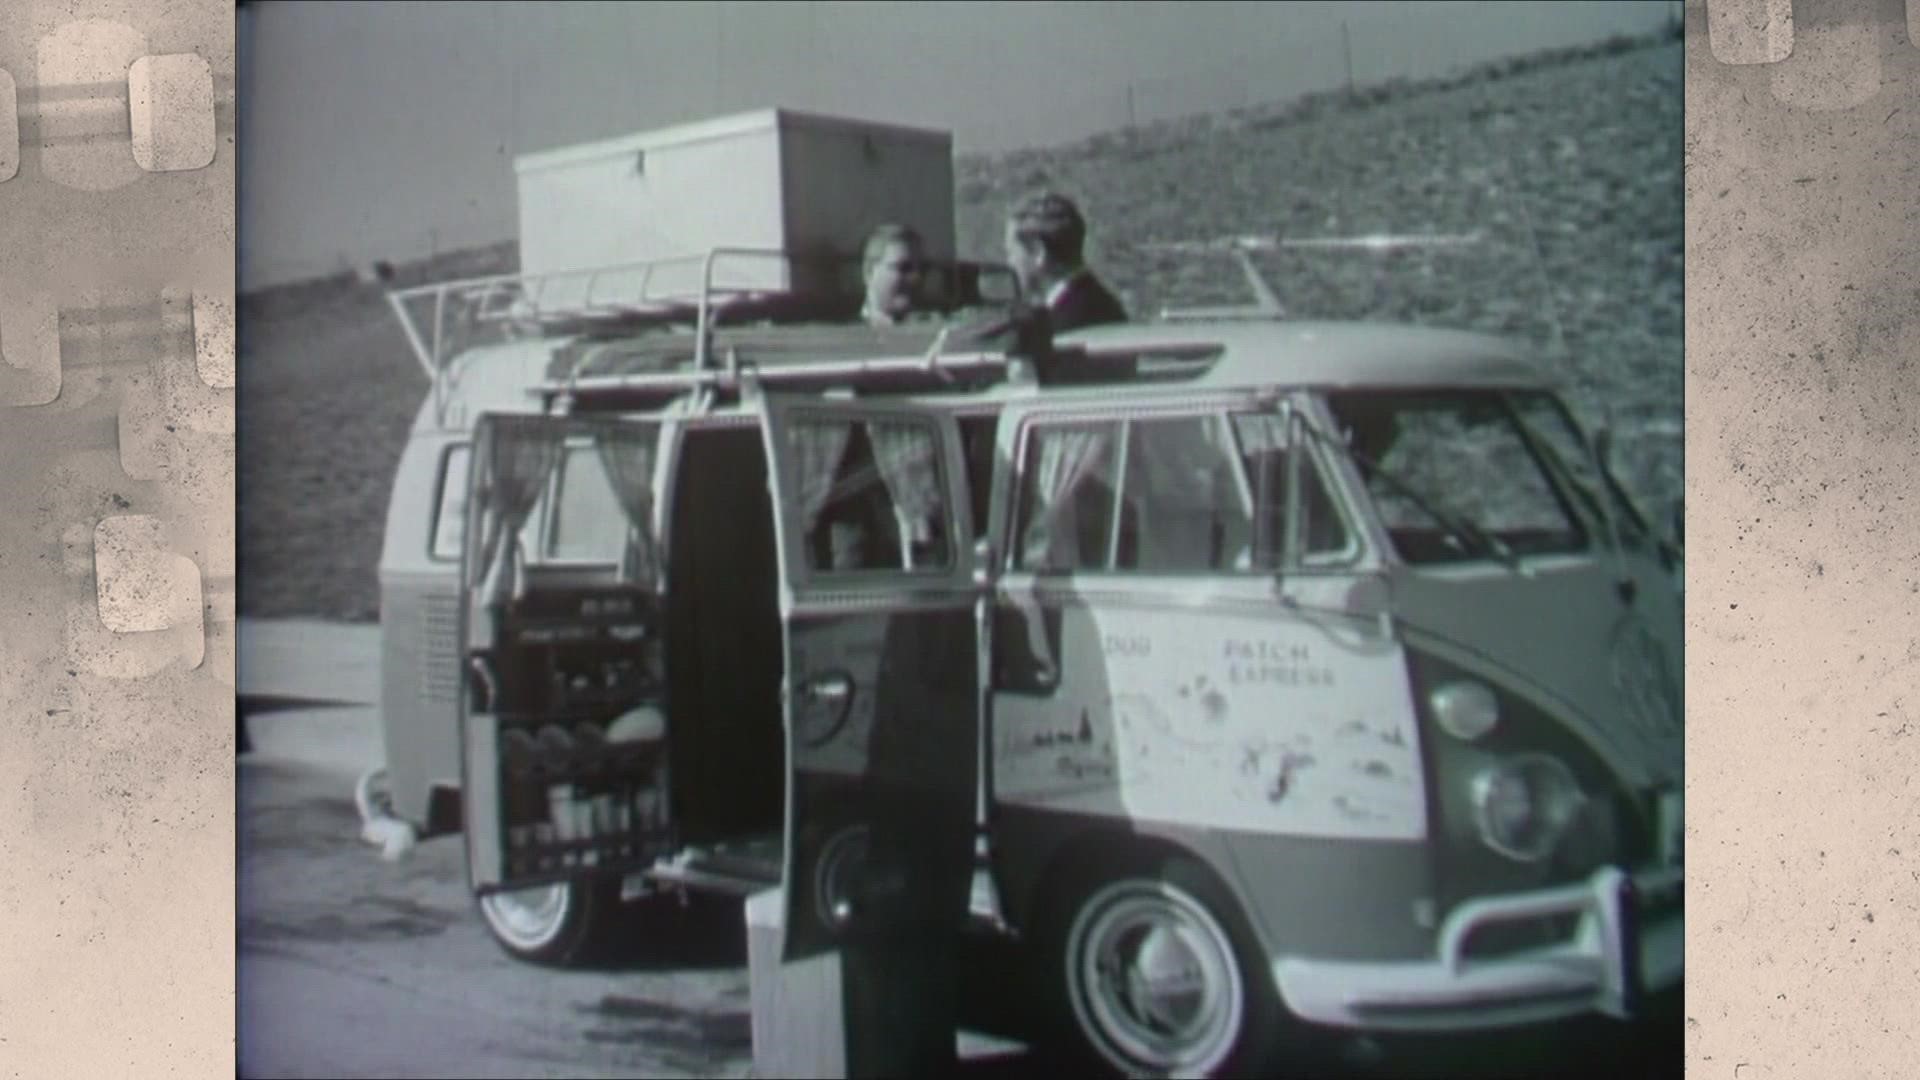 This week's Vintage KSDK is a flashback to the groovy mid-1960s when St. Louisan Dean Oster showed off his converted VW bus. It cost $10,000.